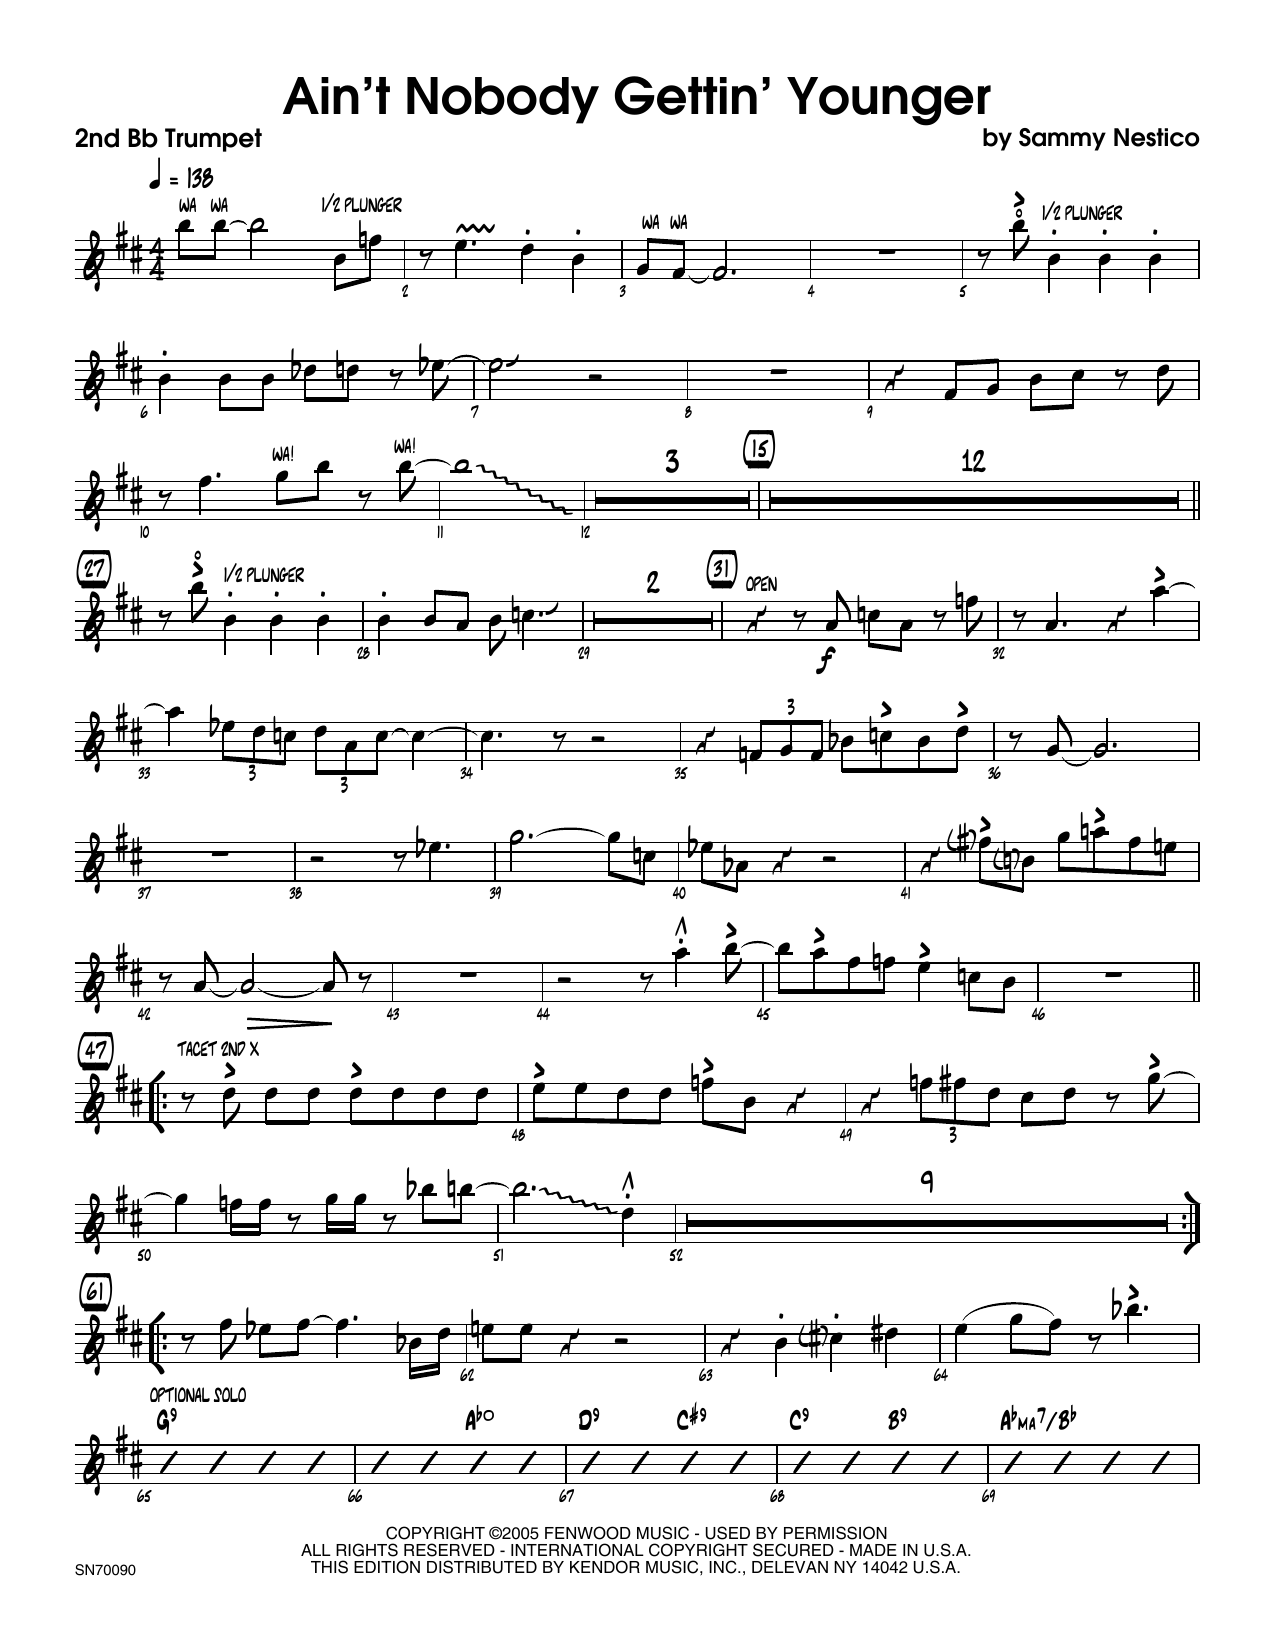 Download Sammy Nestico Ain't Nobody Gettin' Younger - 2nd Bb T Sheet Music